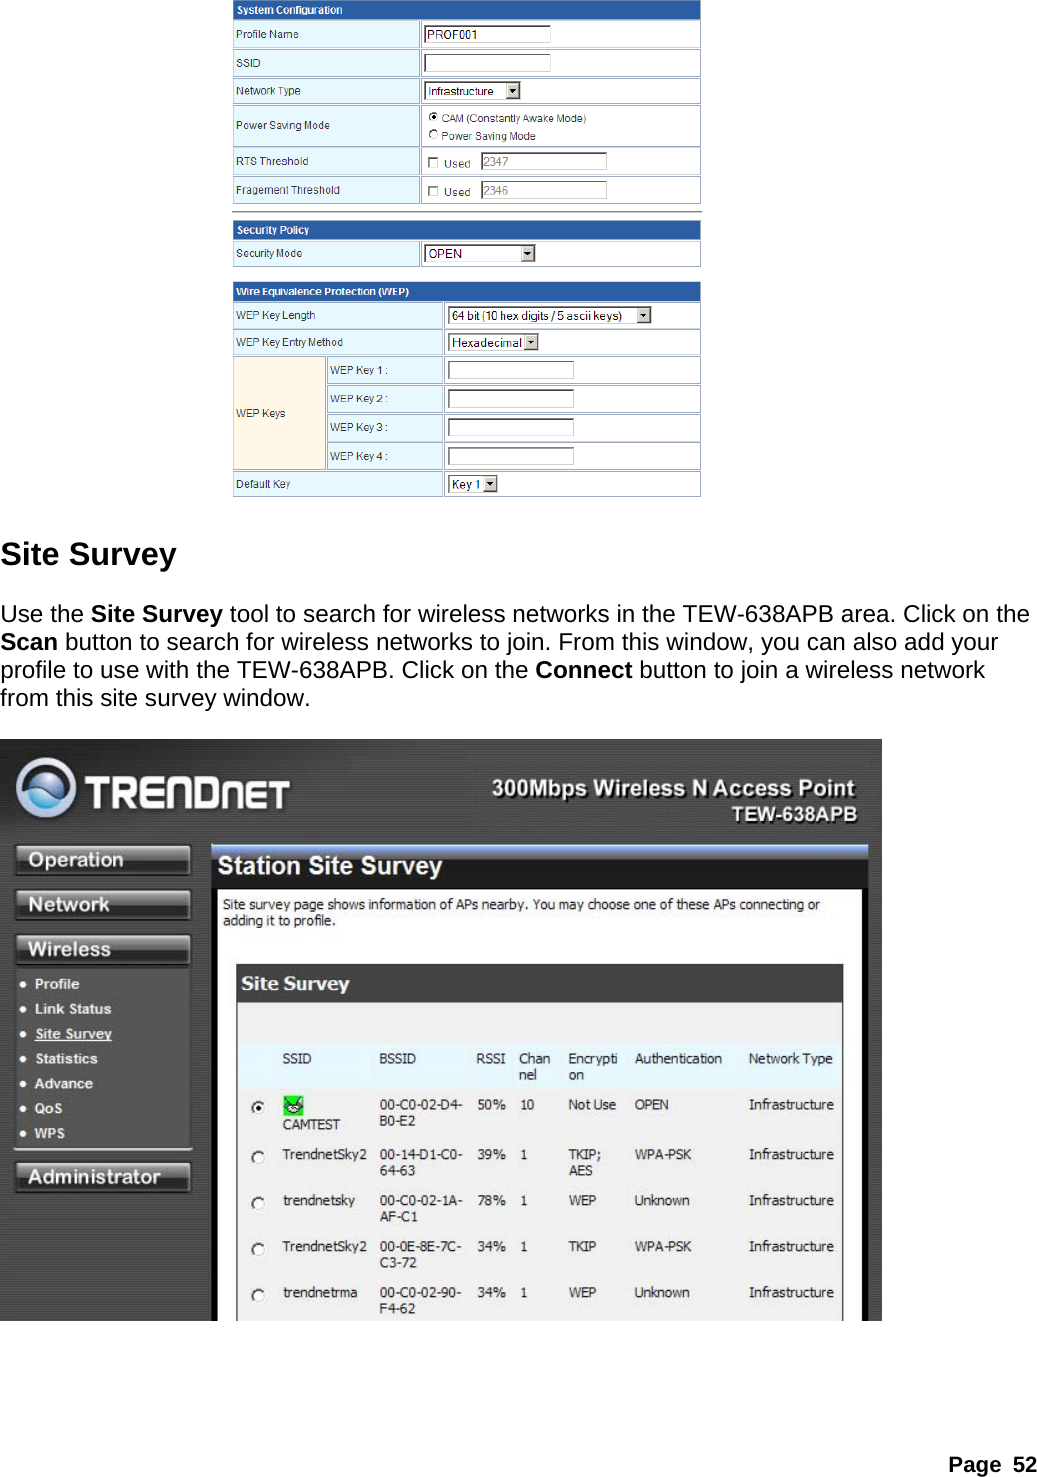 Page 52         Site Survey  Use the Site Survey tool to search for wireless networks in the TEW-638APB area. Click on the Scan button to search for wireless networks to join. From this window, you can also add your profile to use with the TEW-638APB. Click on the Connect button to join a wireless network from this site survey window.       